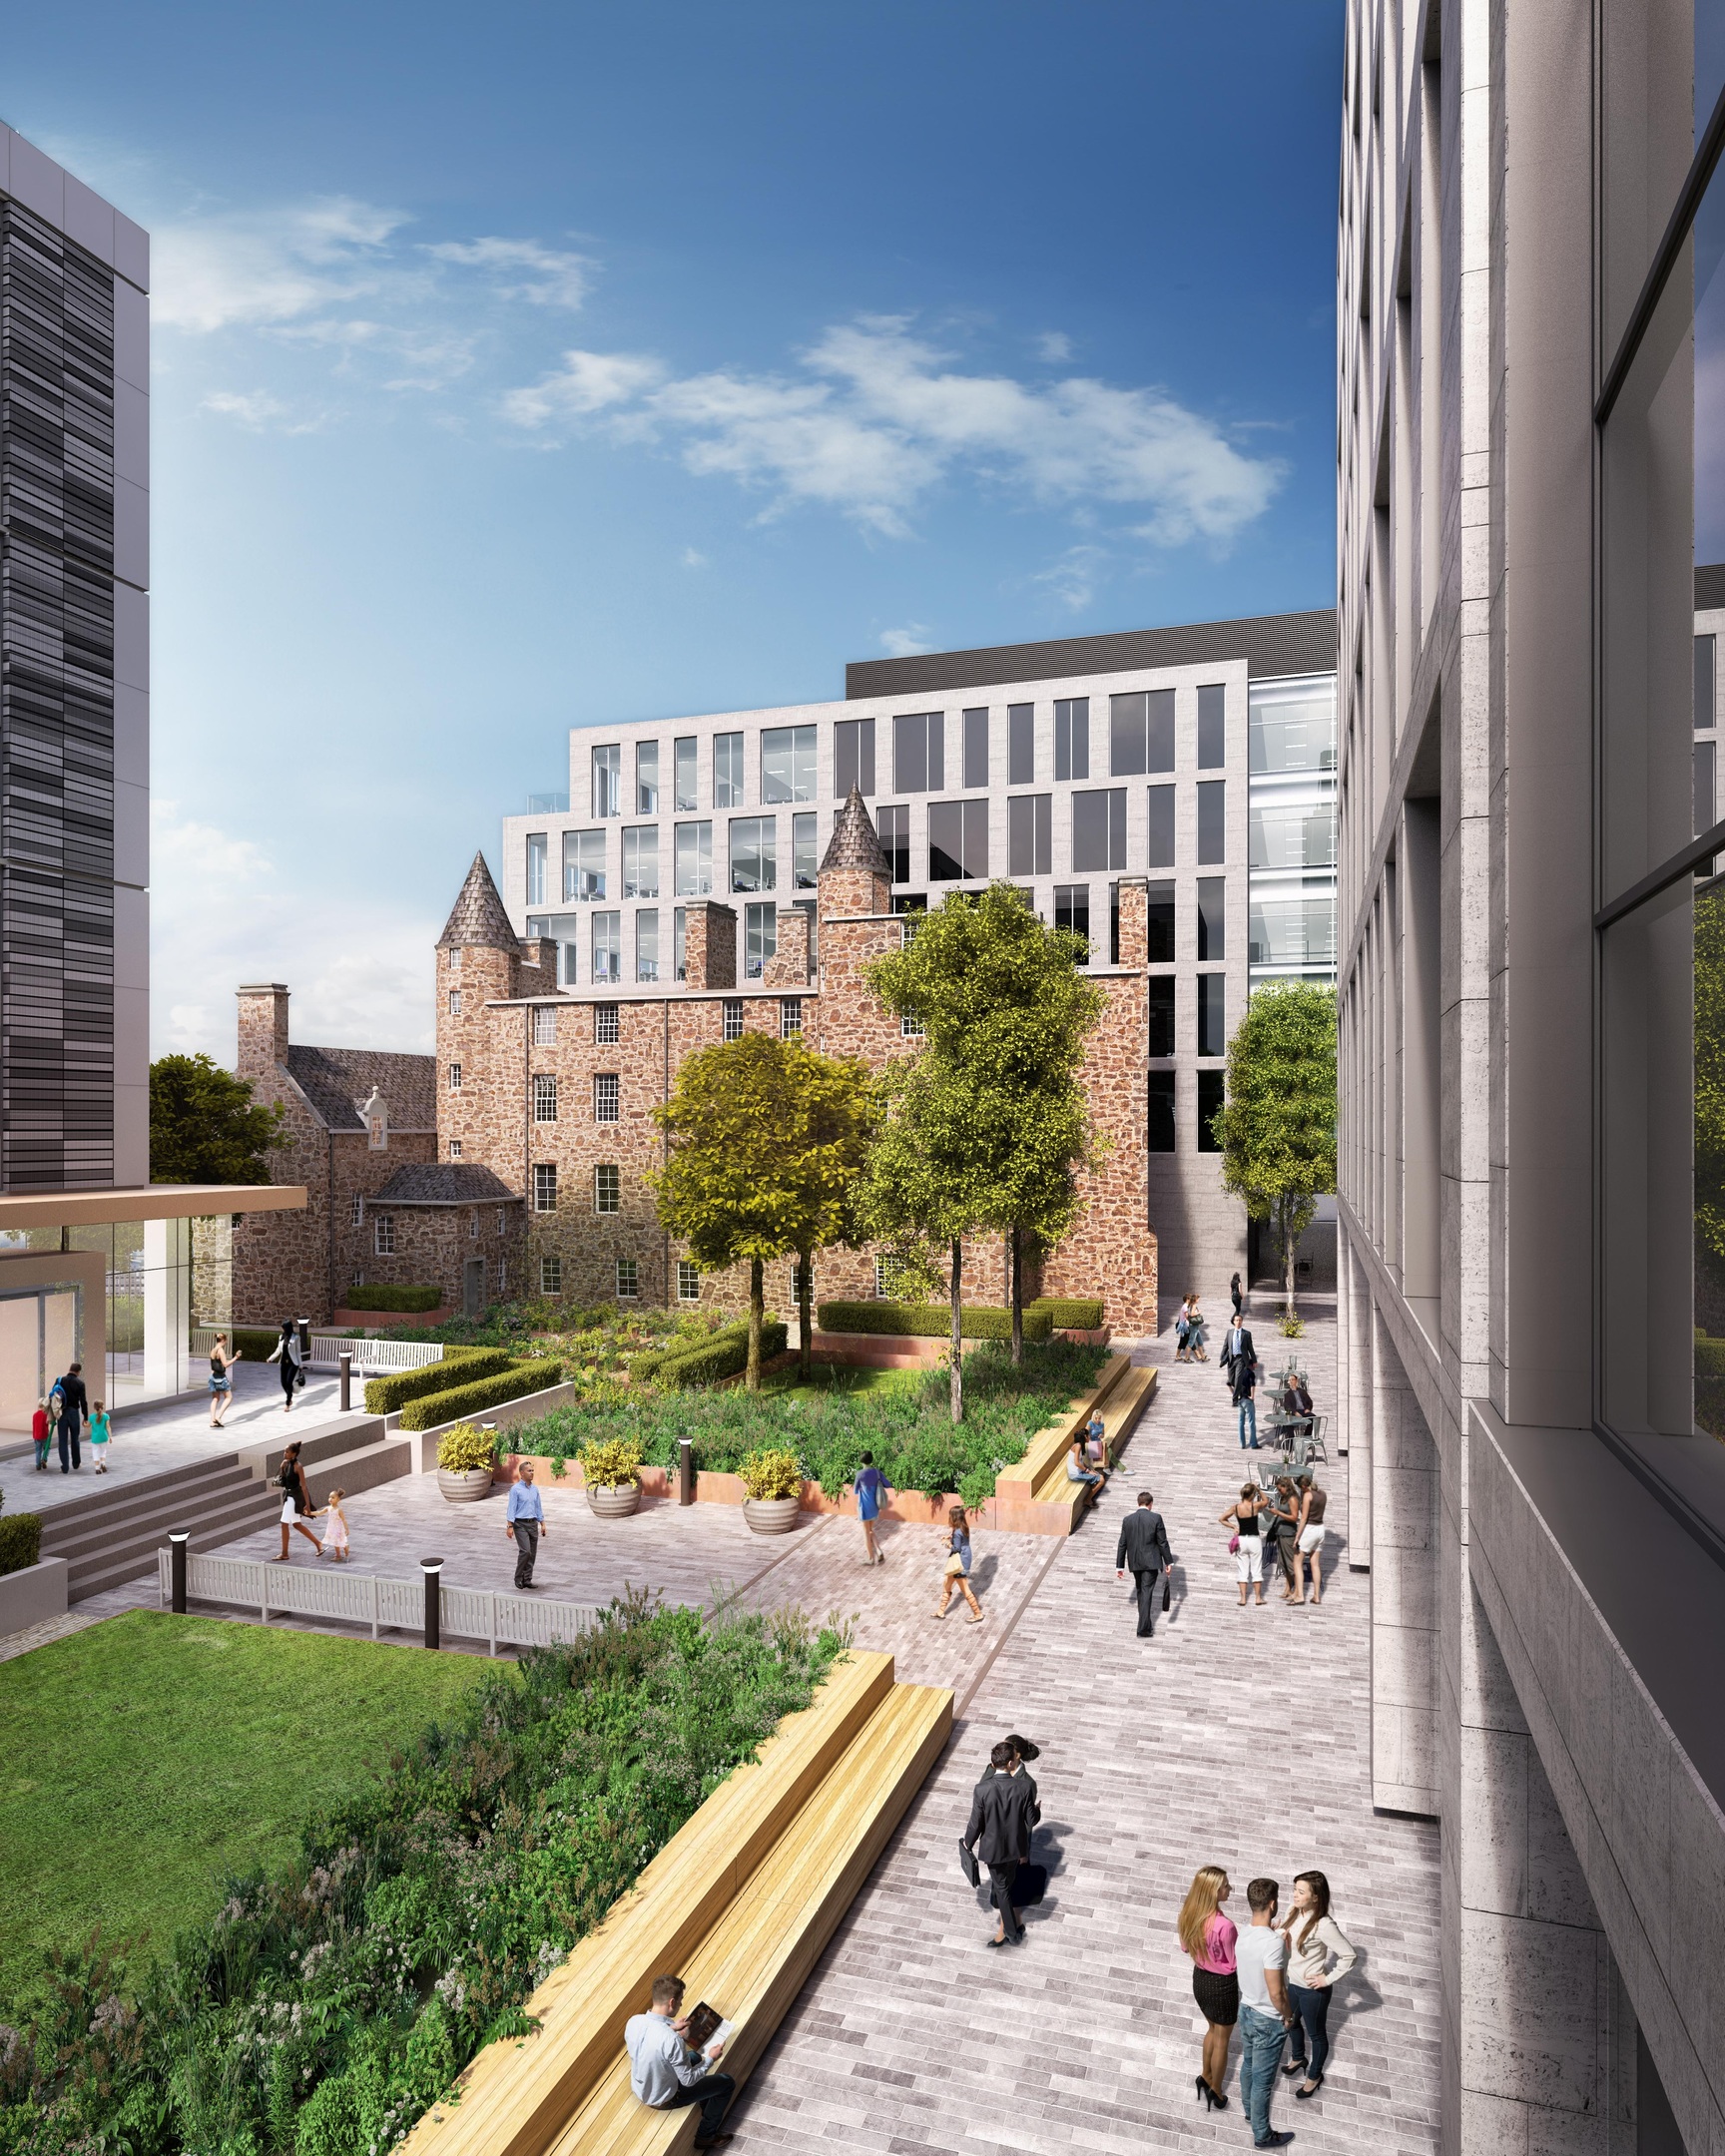 How Provost Skene House might look when Marischal Square is finished